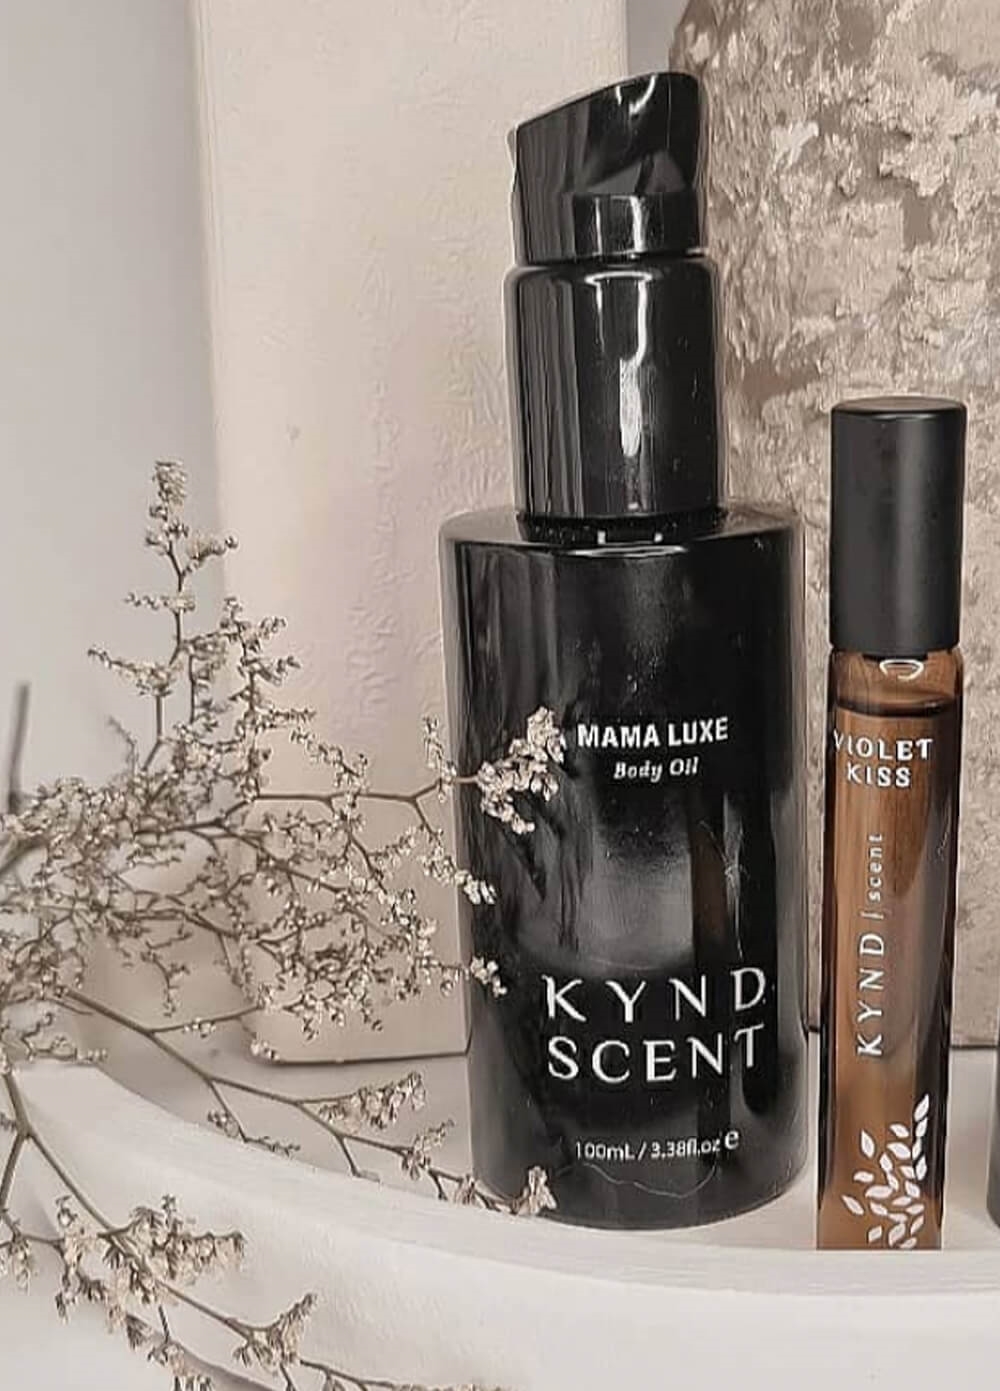 Kynd Scent - Mama Luxe Body Oil | Queen Bee